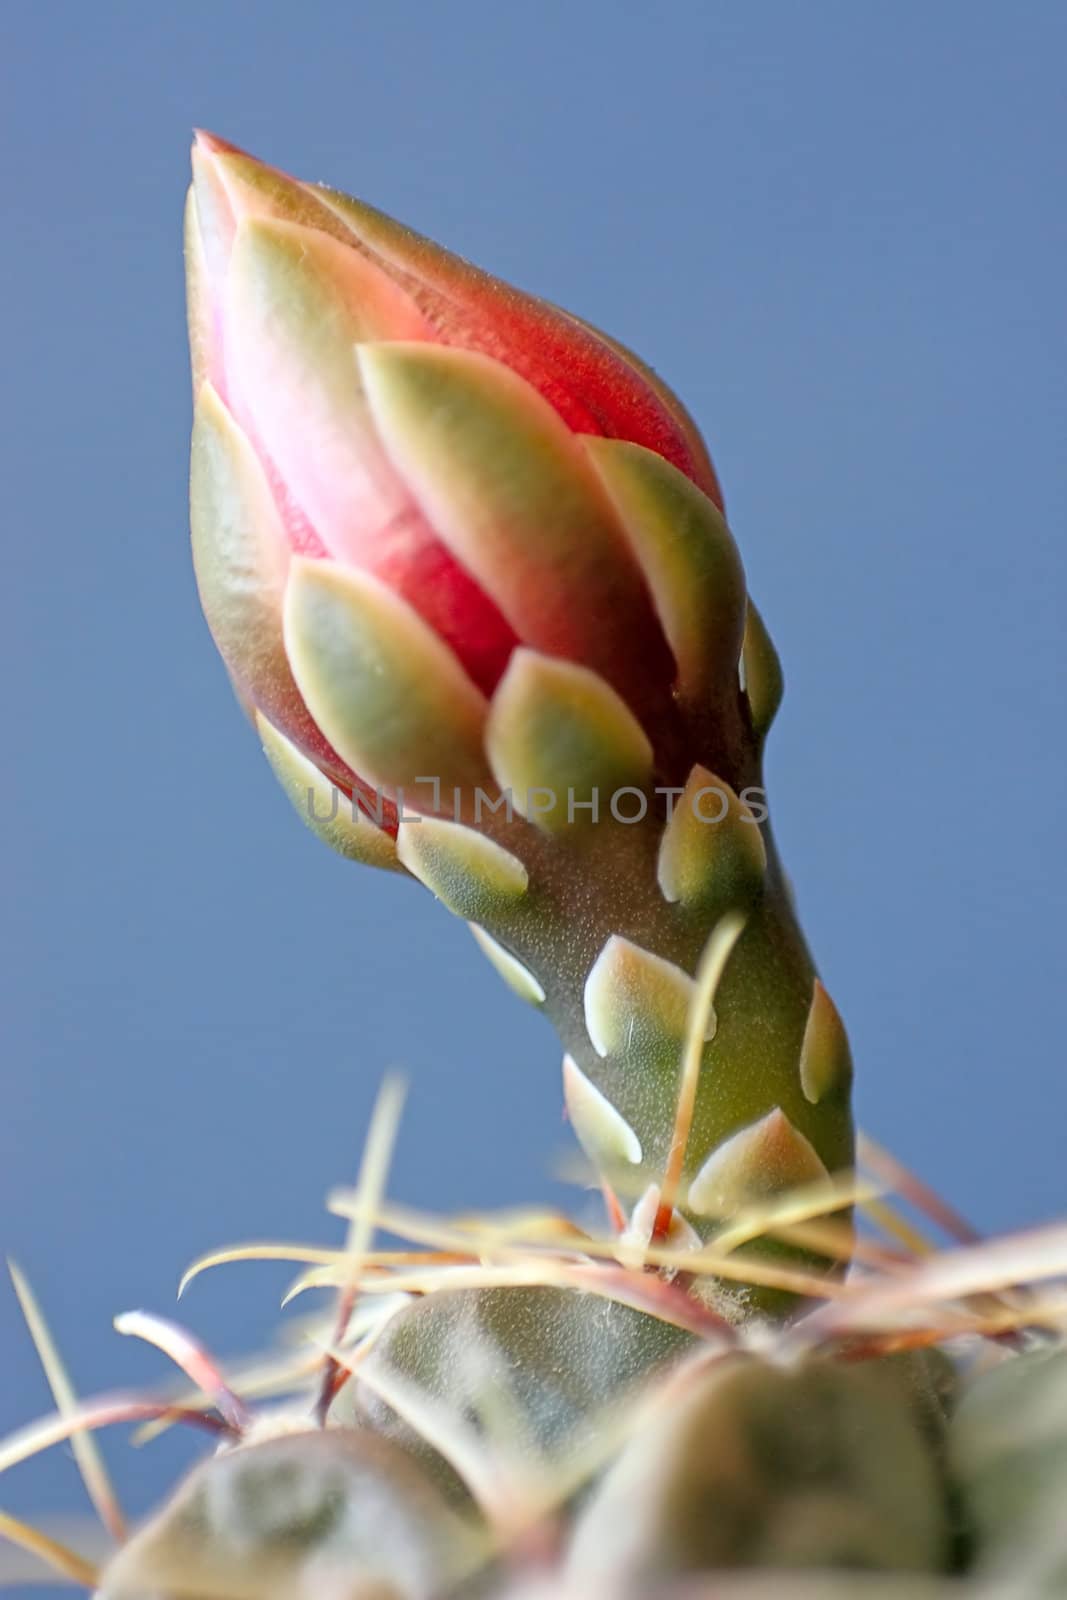 View of  cactus flower bud(Gymnocalycium).Image with shallow depth of field.